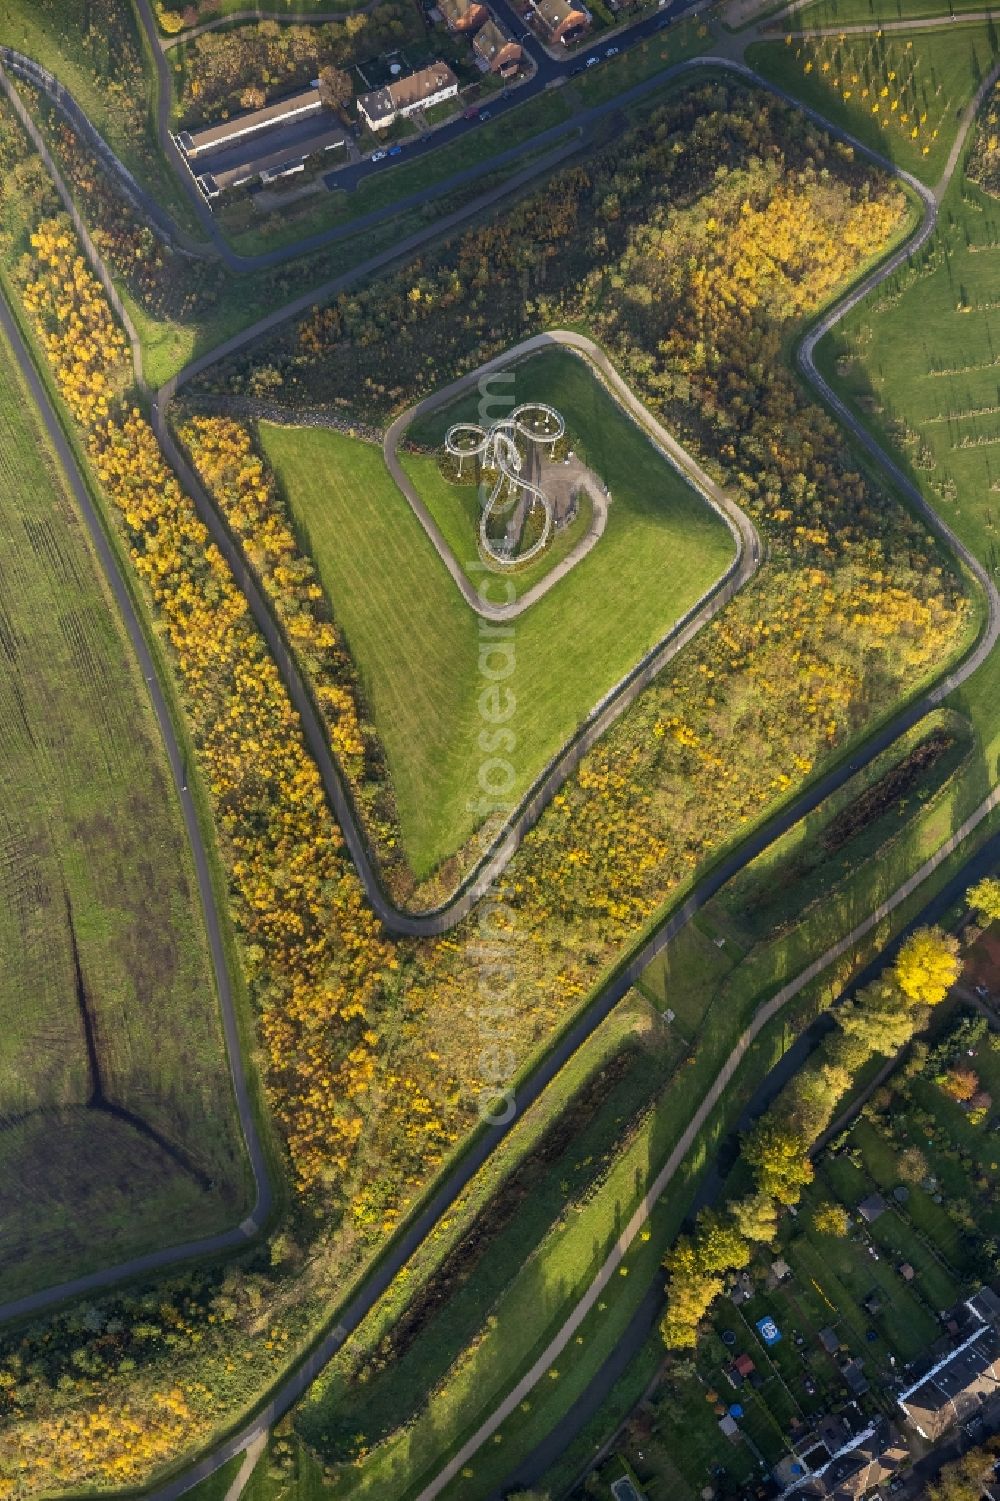 Aerial image Duisburg - Artwork Tiger and Turtle Magic Mountain in Anger Park in Duisburg in the Ruhr area in North Rhine-Westphalia